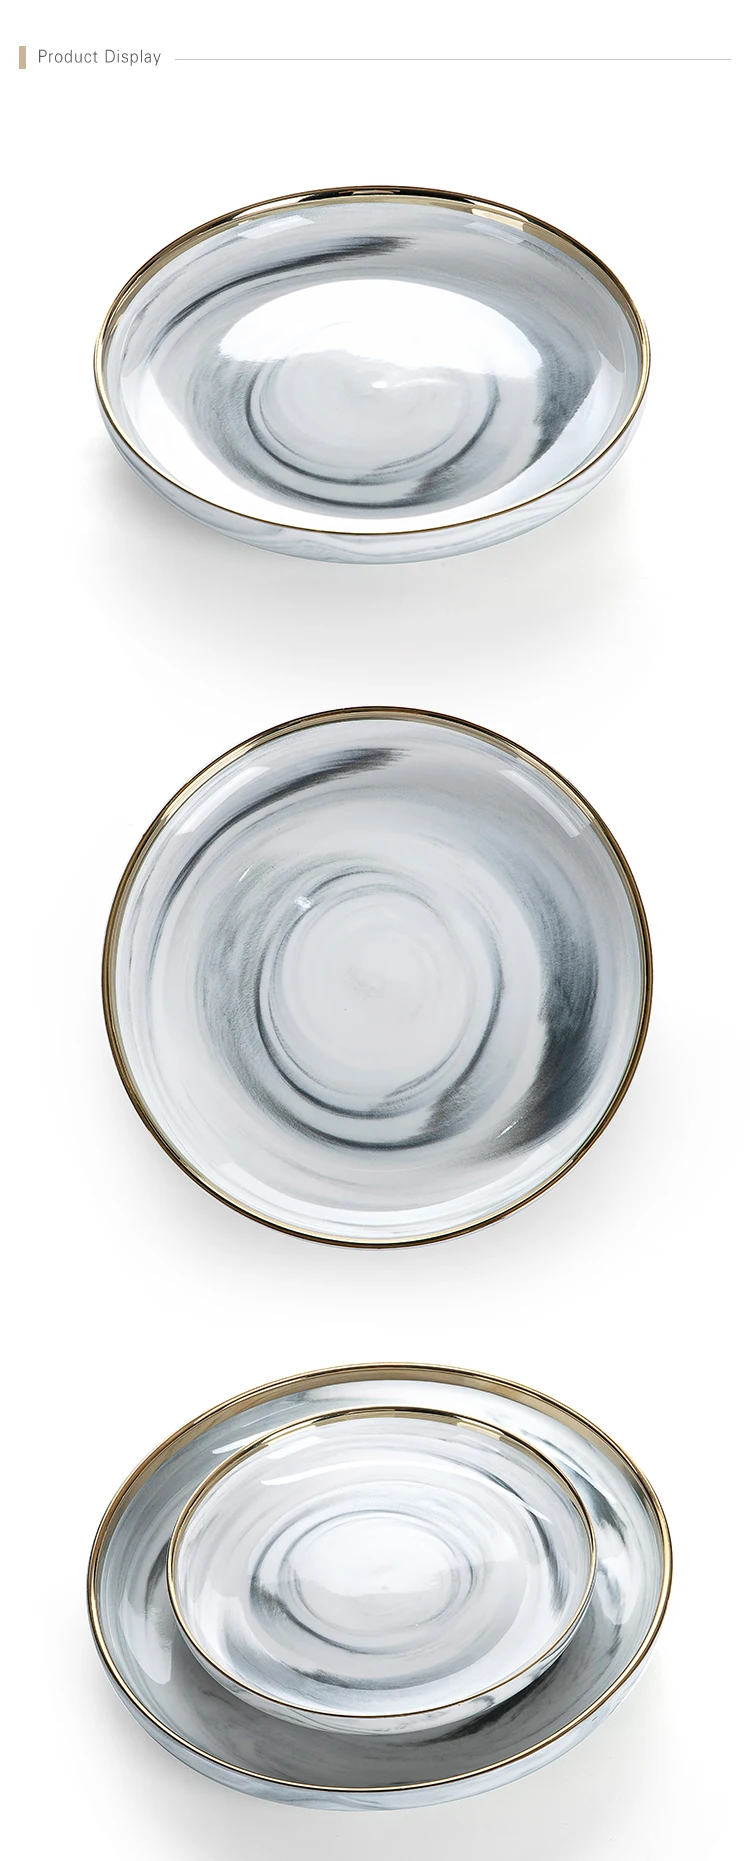 Hotel Supplies Gold Rim Grey Marble Dish, Restaurant Supplies Gold Rim Grey Marble Dish, Marble Dinner Plate>